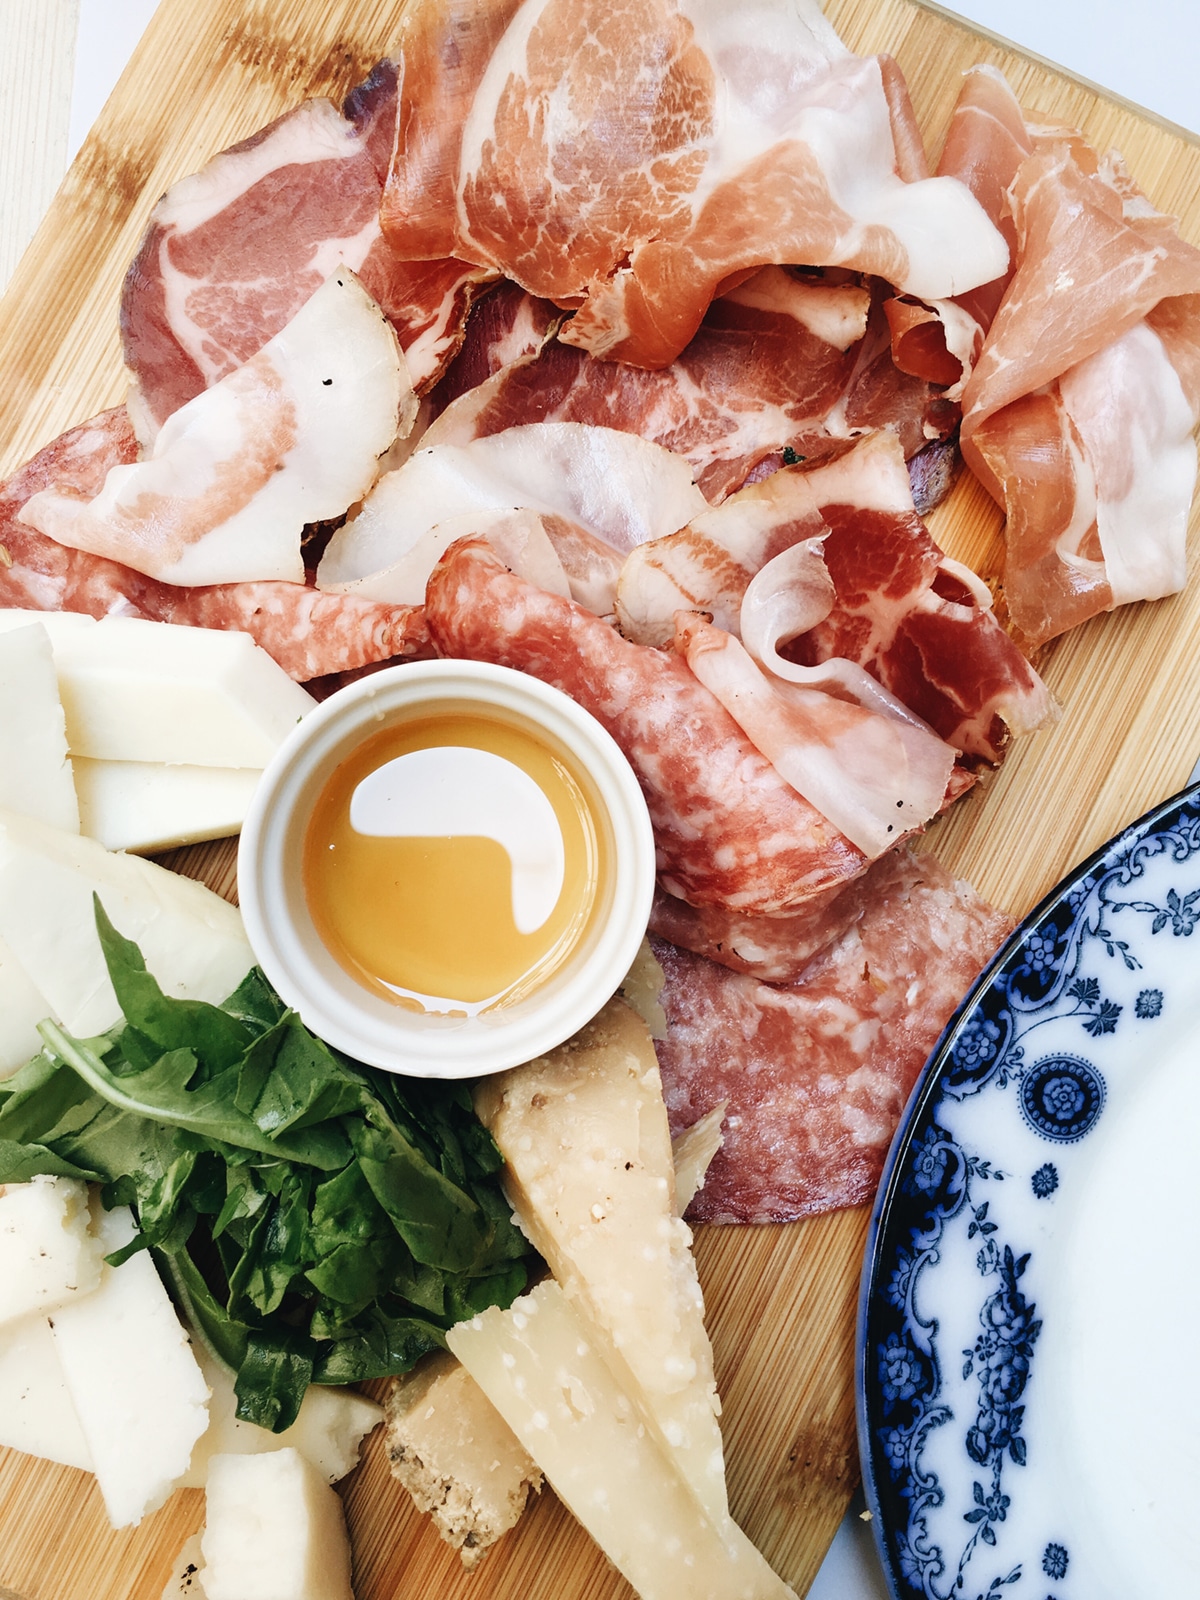 charcuterie board at Dilla restaurant | Rome travel guide from coco kelley